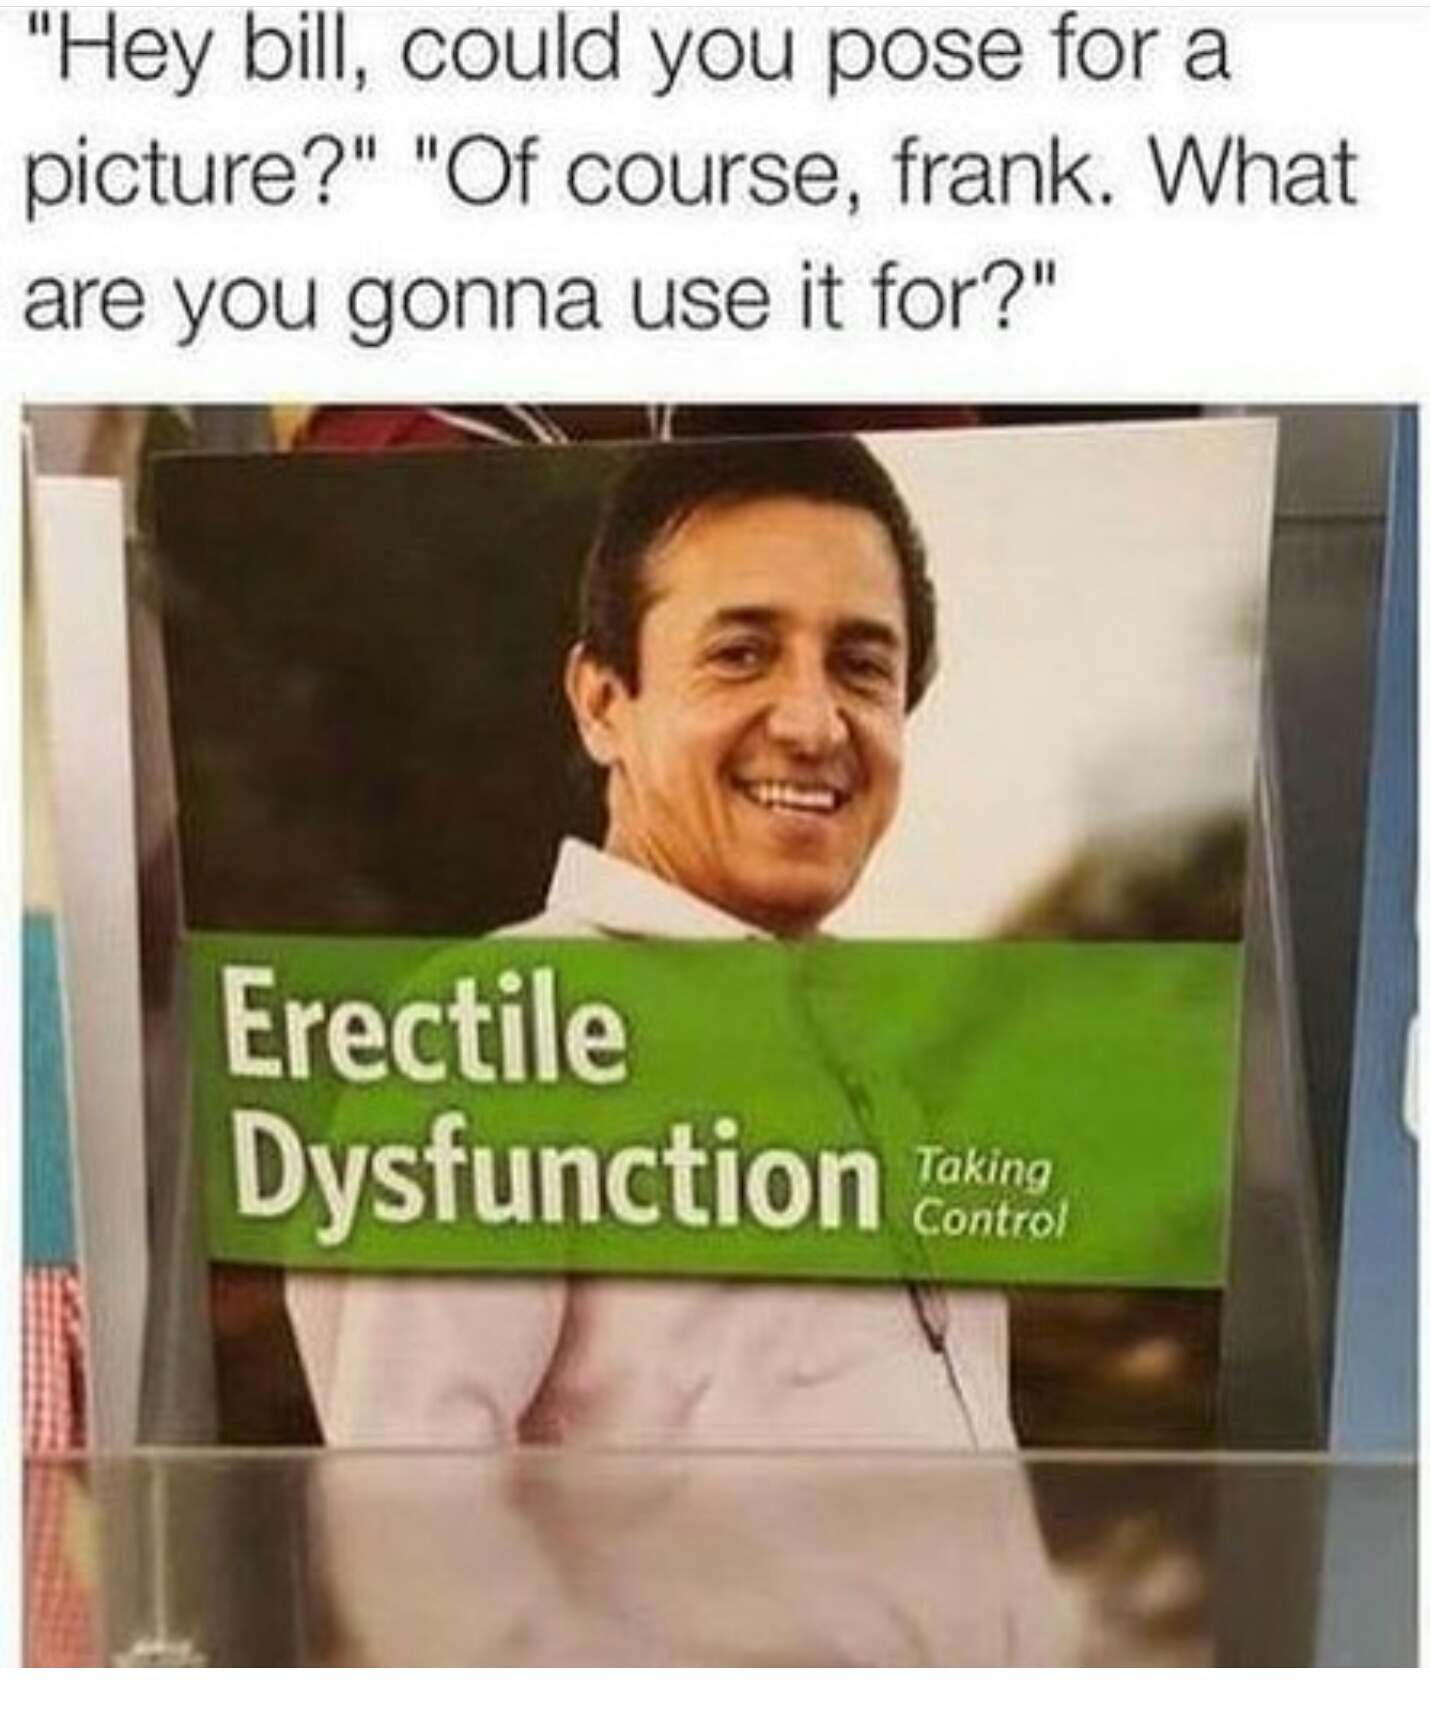 erectile dysfunction meme - "Hey bill, could you pose for a picture?" "Of course, frank. What are you gonna use it for?" Erectile Dysfunction Torino Taking Control